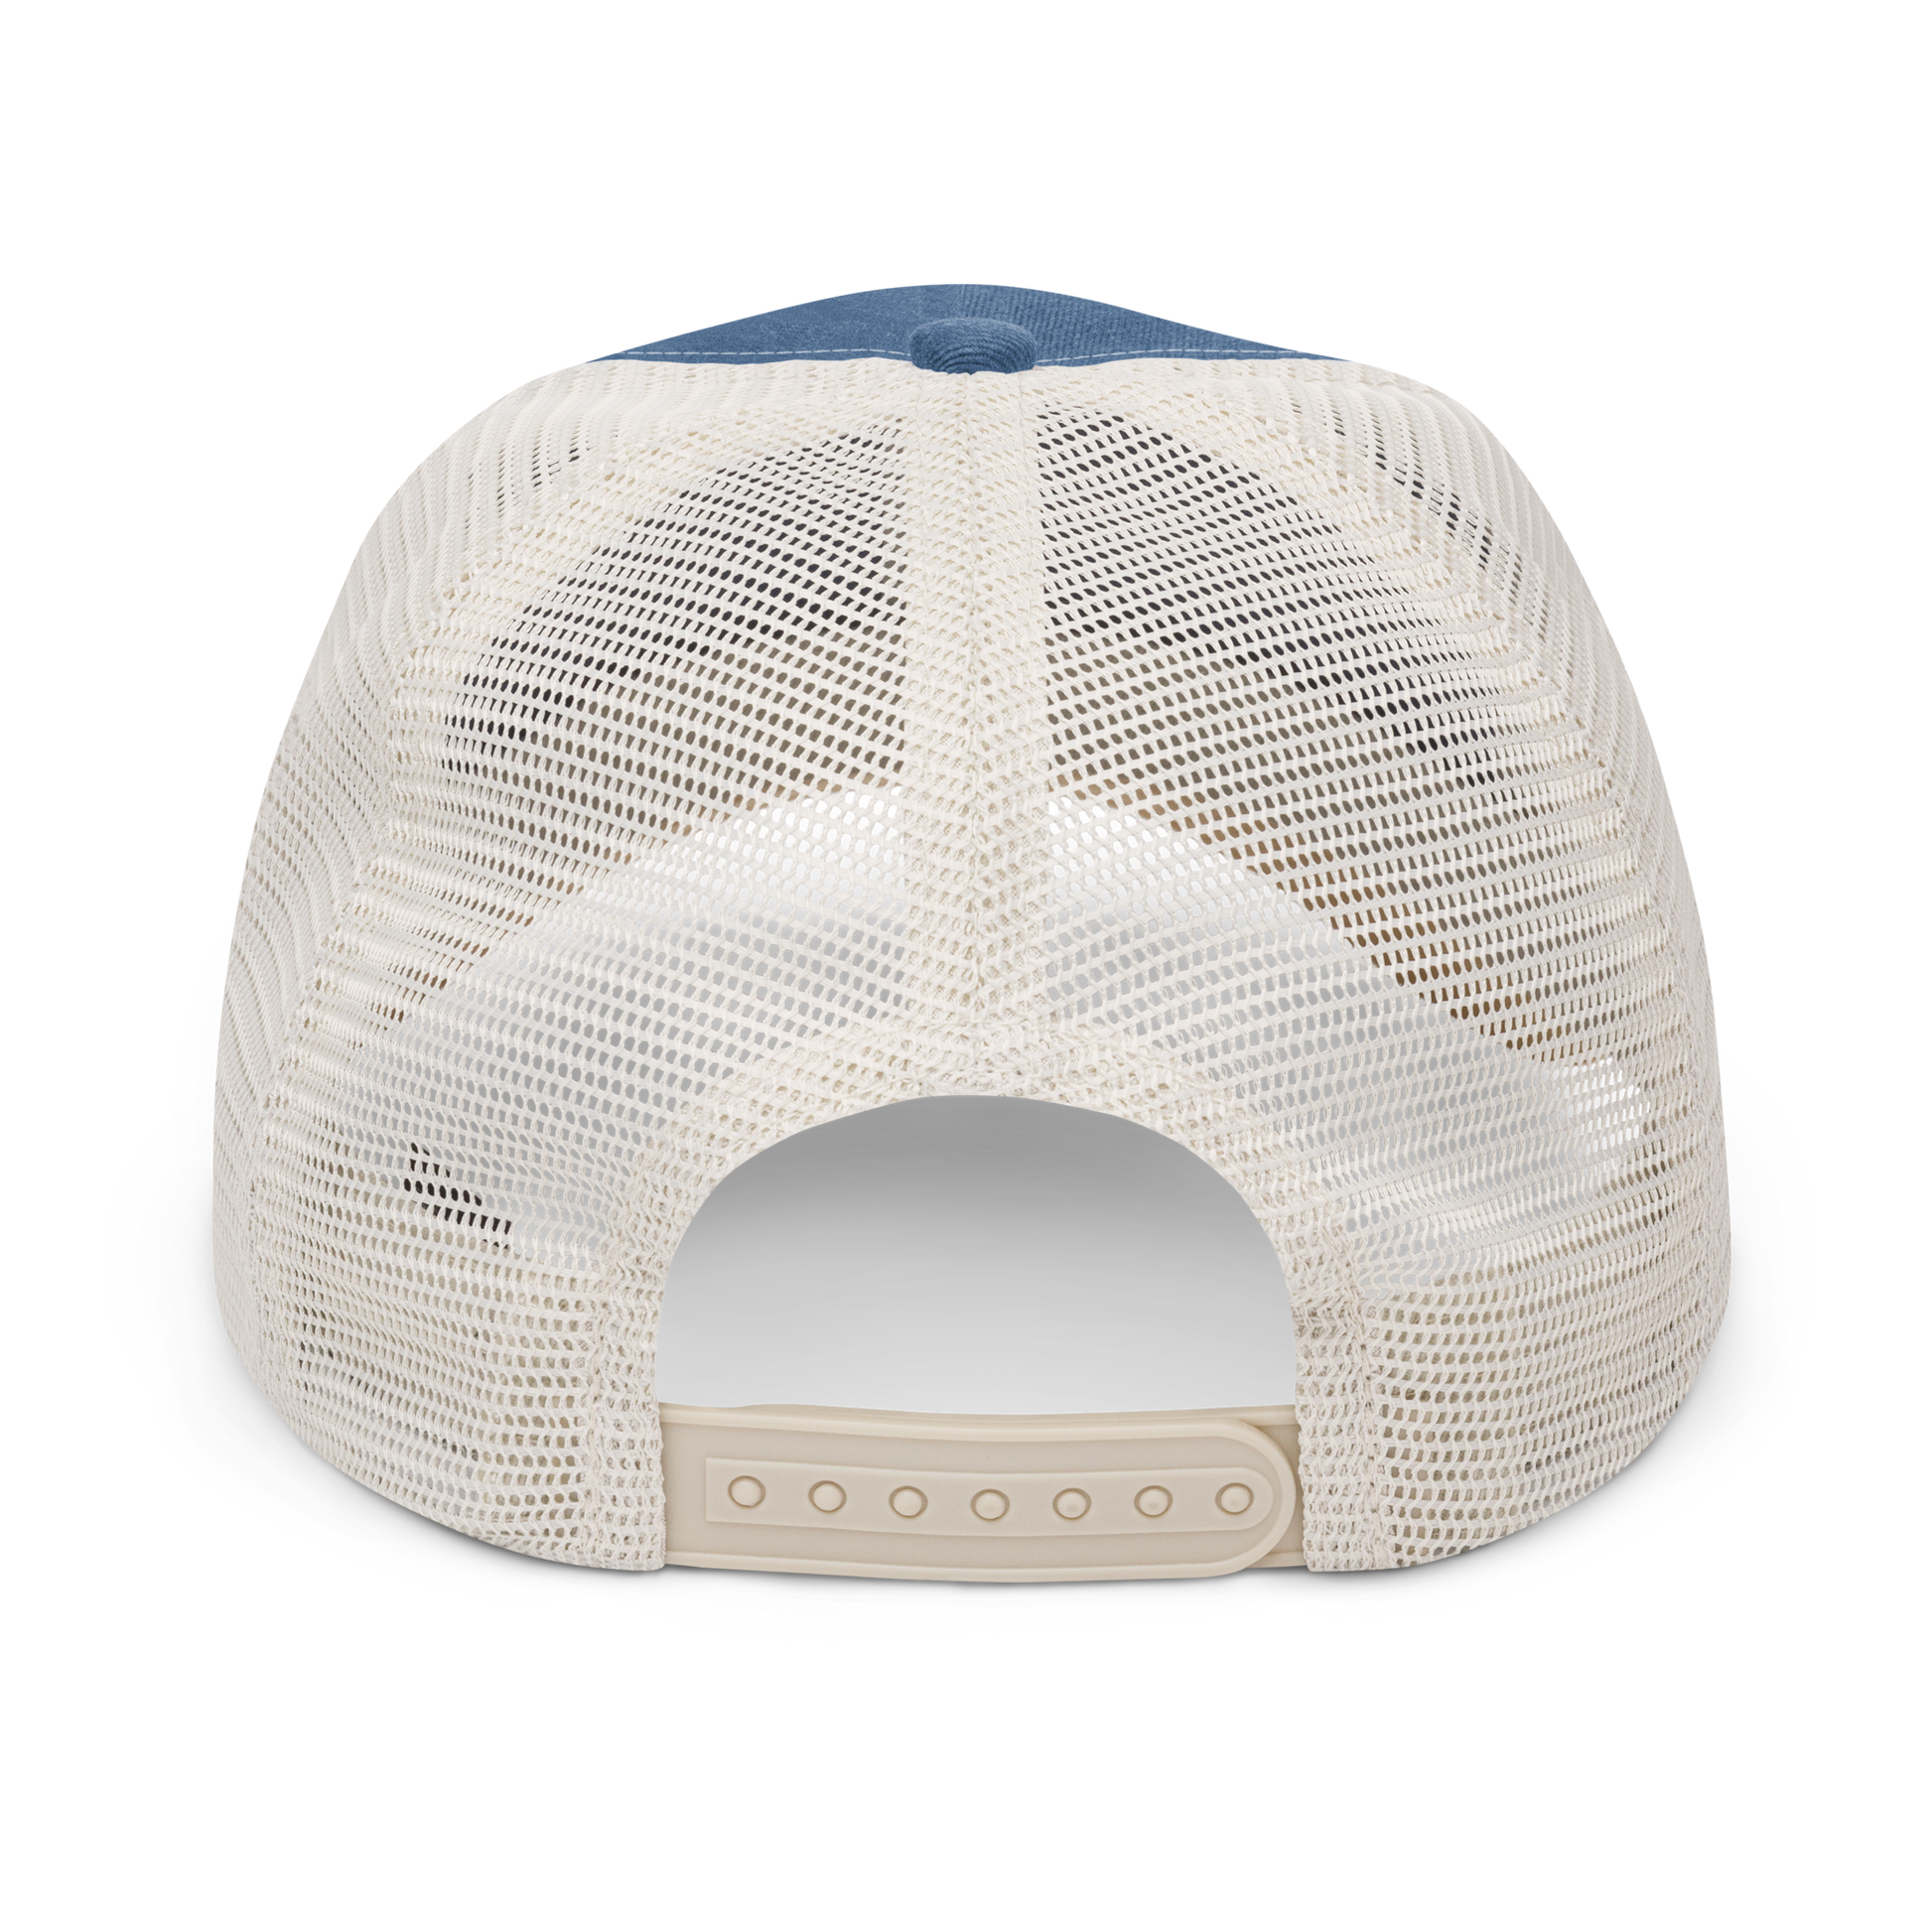 YHM Designs - YQT Thunder Bay Pigment-Dyed Trucker Cap - Crossed-X Design with Airport Code and Vintage Propliner - White Embroidery - Image 19